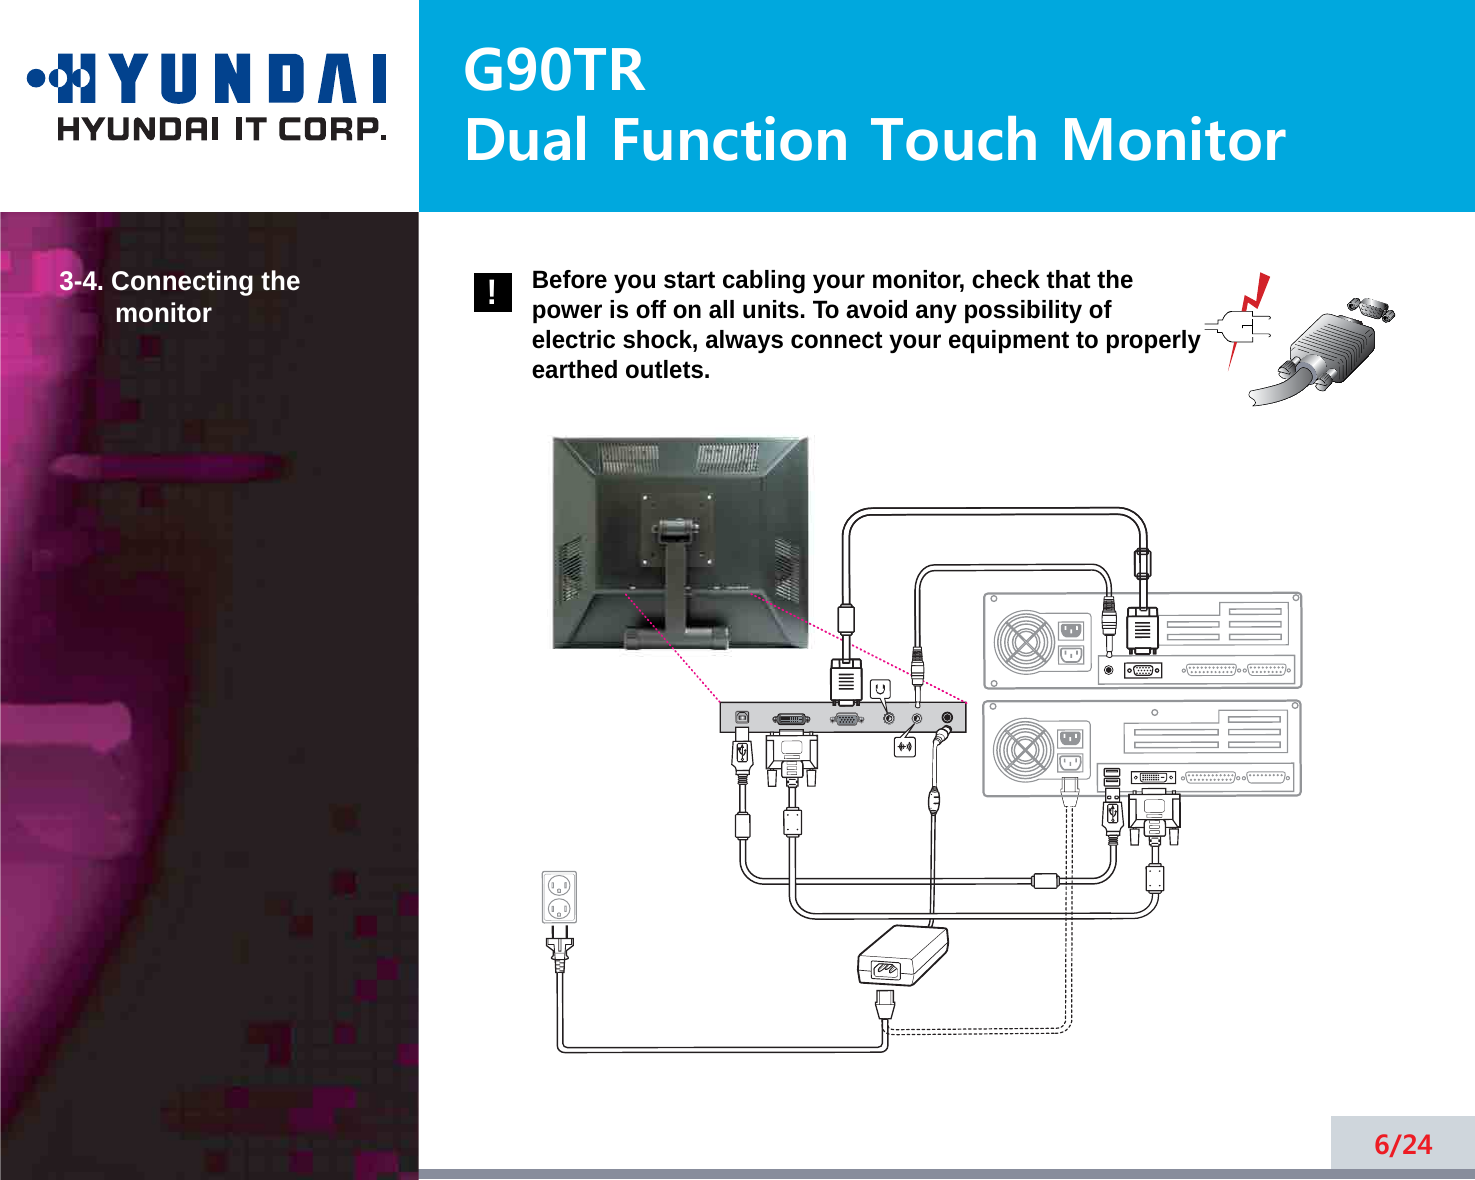 G90TRDual Function Touch Monitor6/243-4. Connecting the monitor Before you start cabling your monitor, check that thepower is off on all units. To avoid any possibility ofelectric shock, always connect your equipment to properlyearthed outlets.!